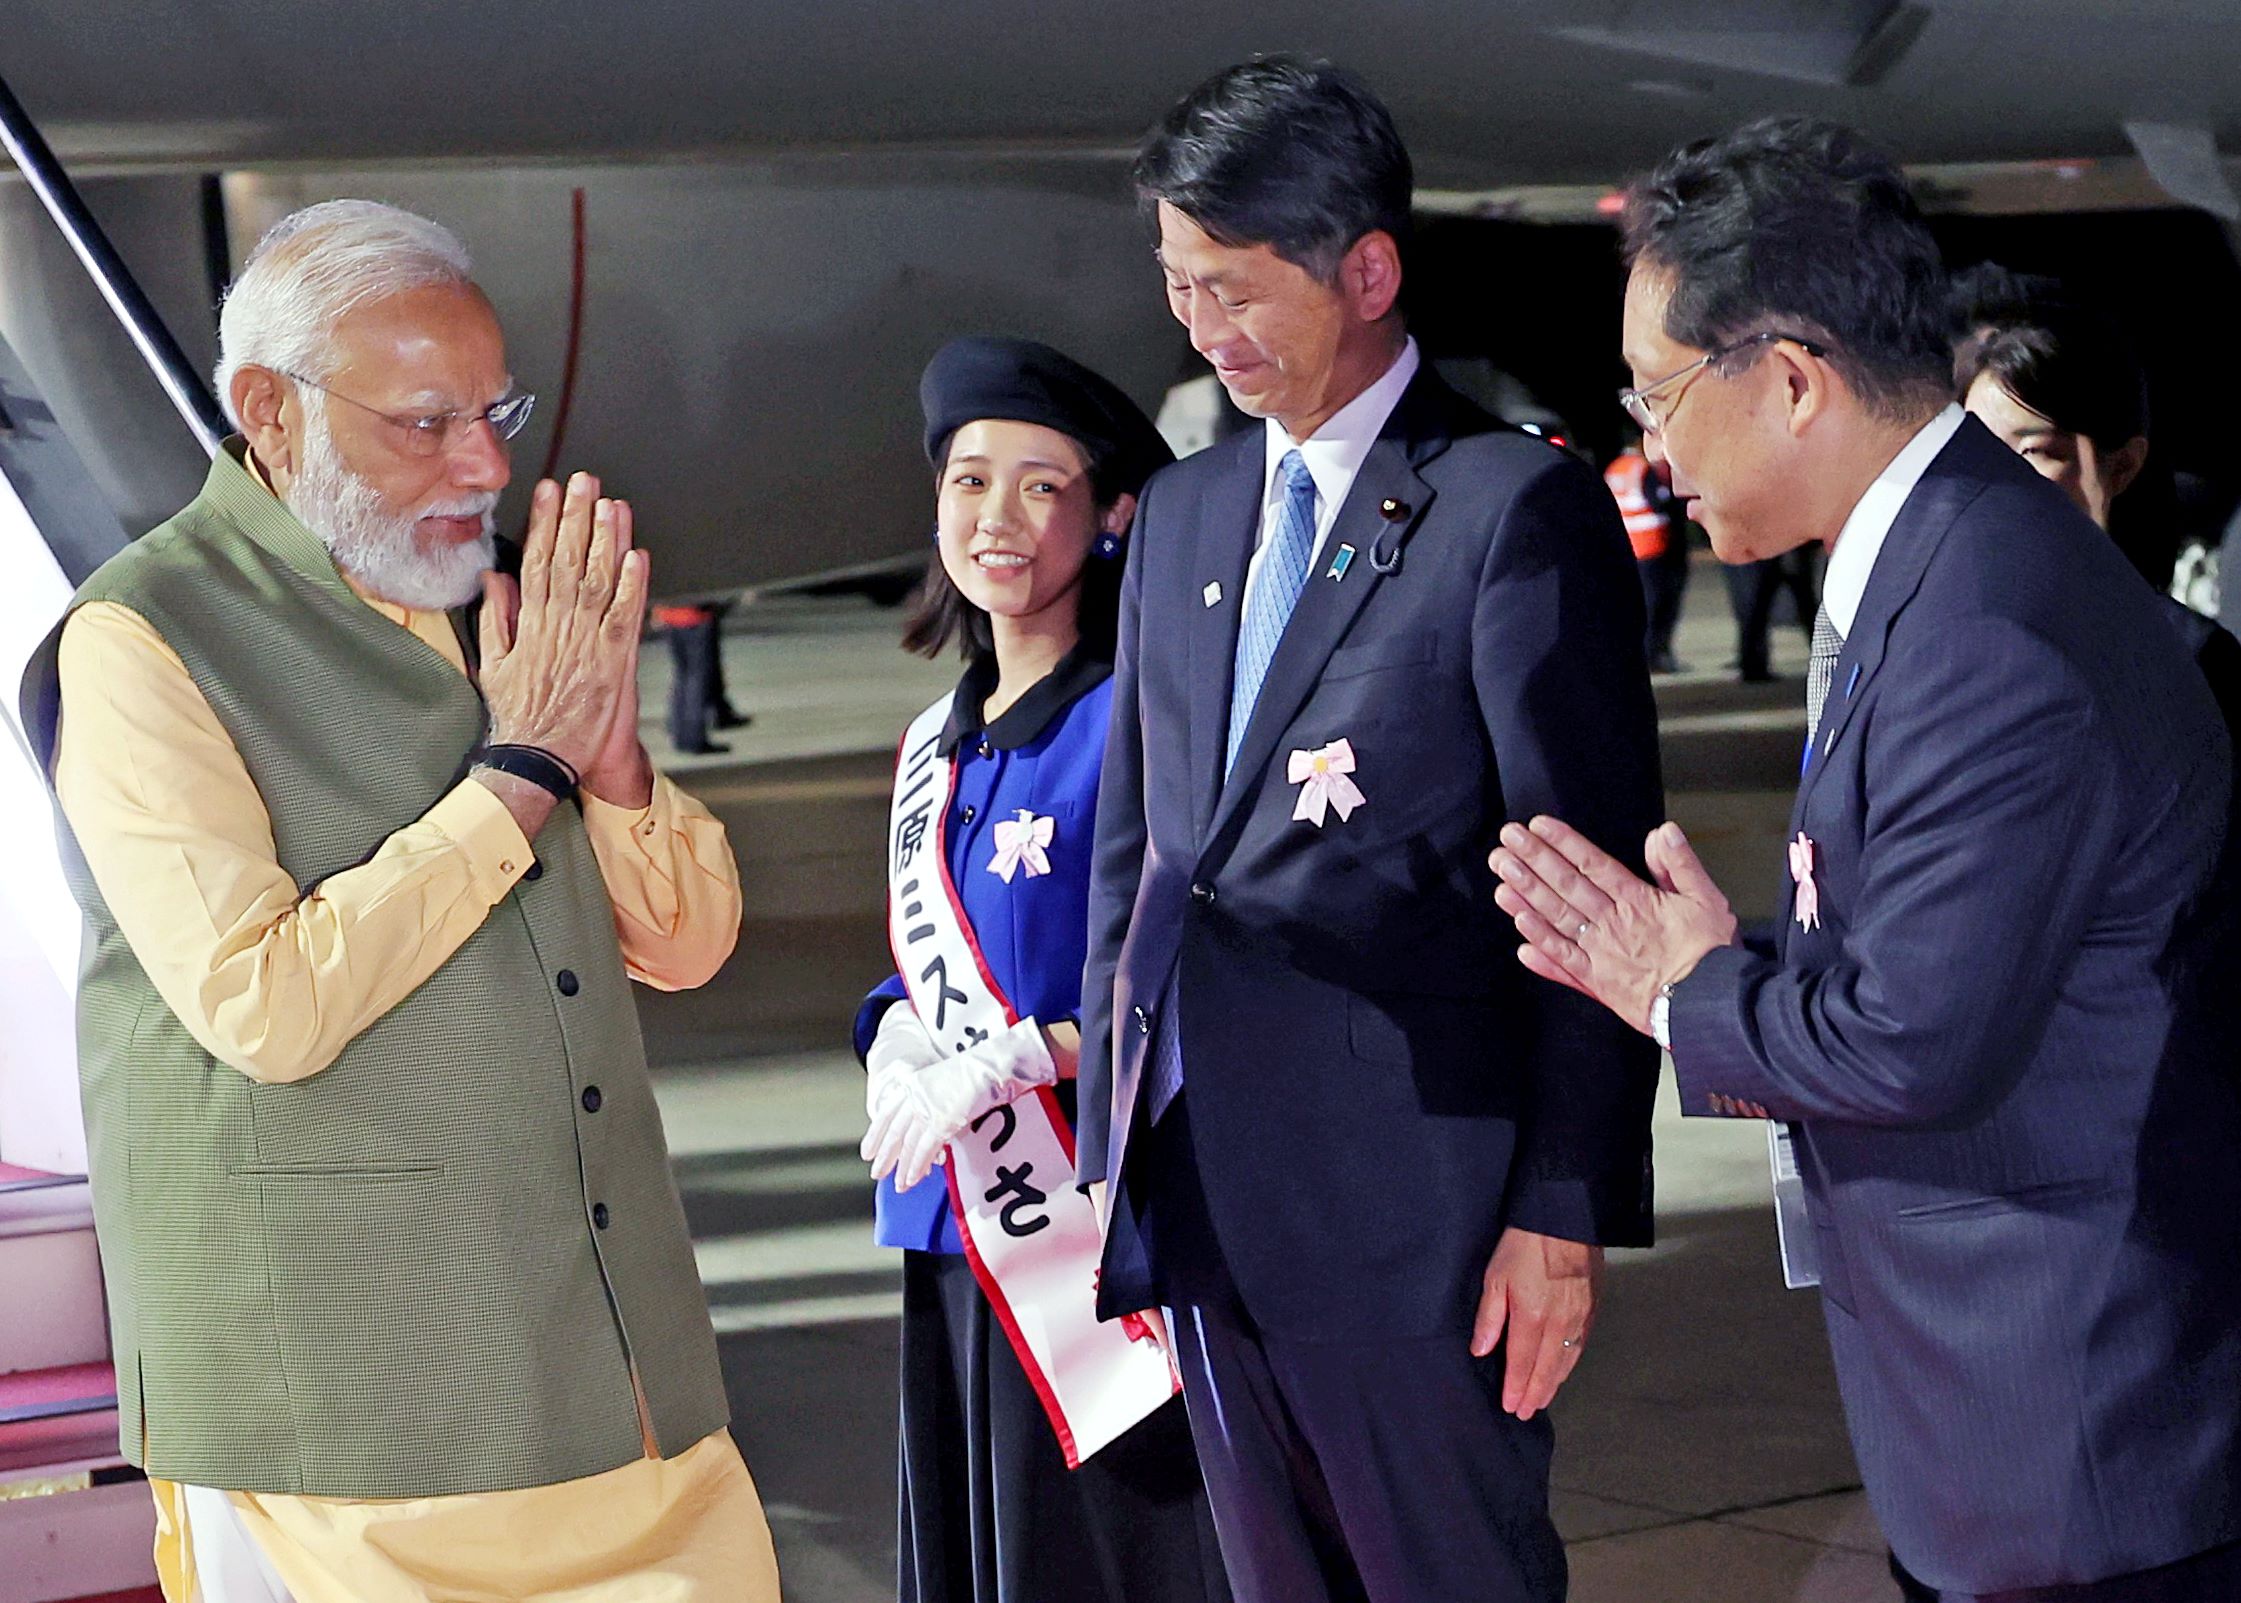 G-7, Quad and Pacific: Modi embarks on a diplomatic tour to meet world leaders